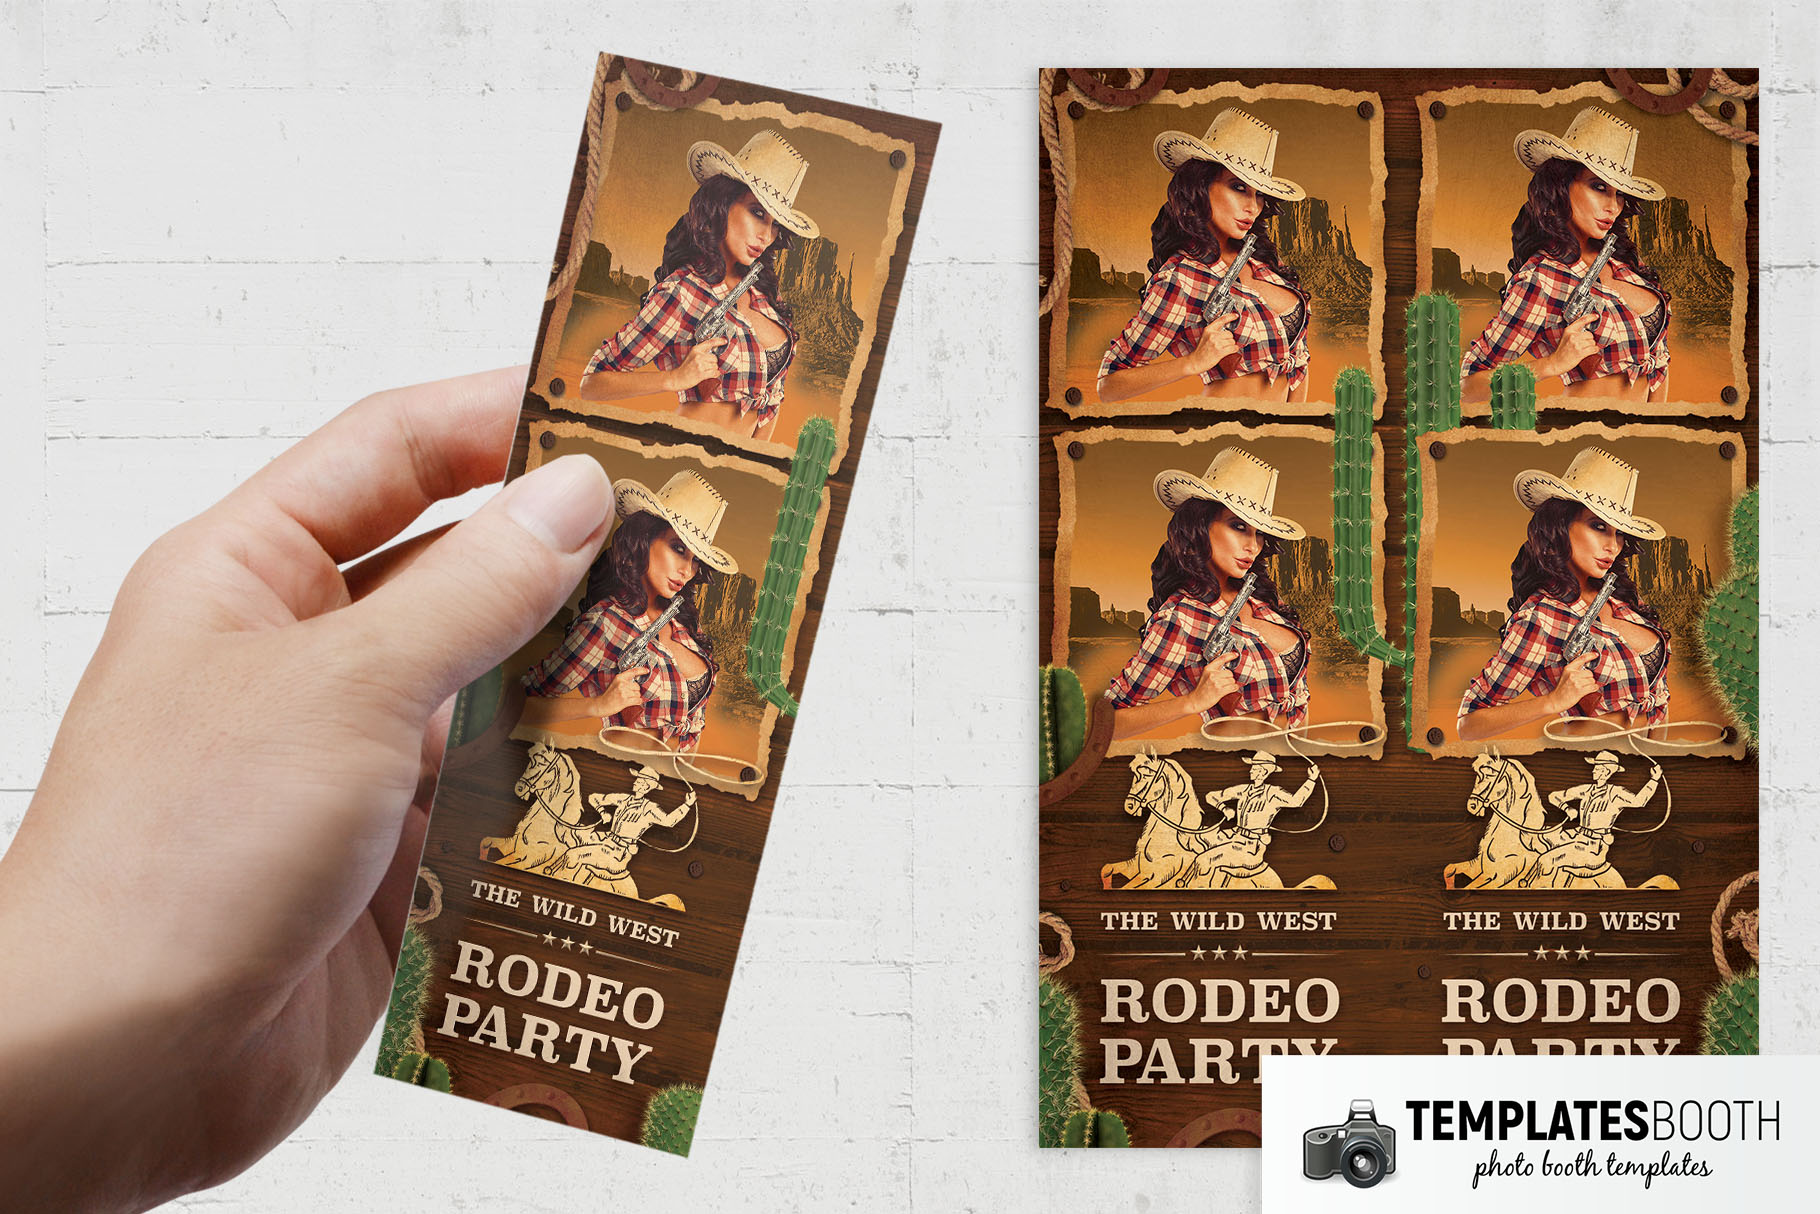 Rodeo Cowboy Photo Booth Template